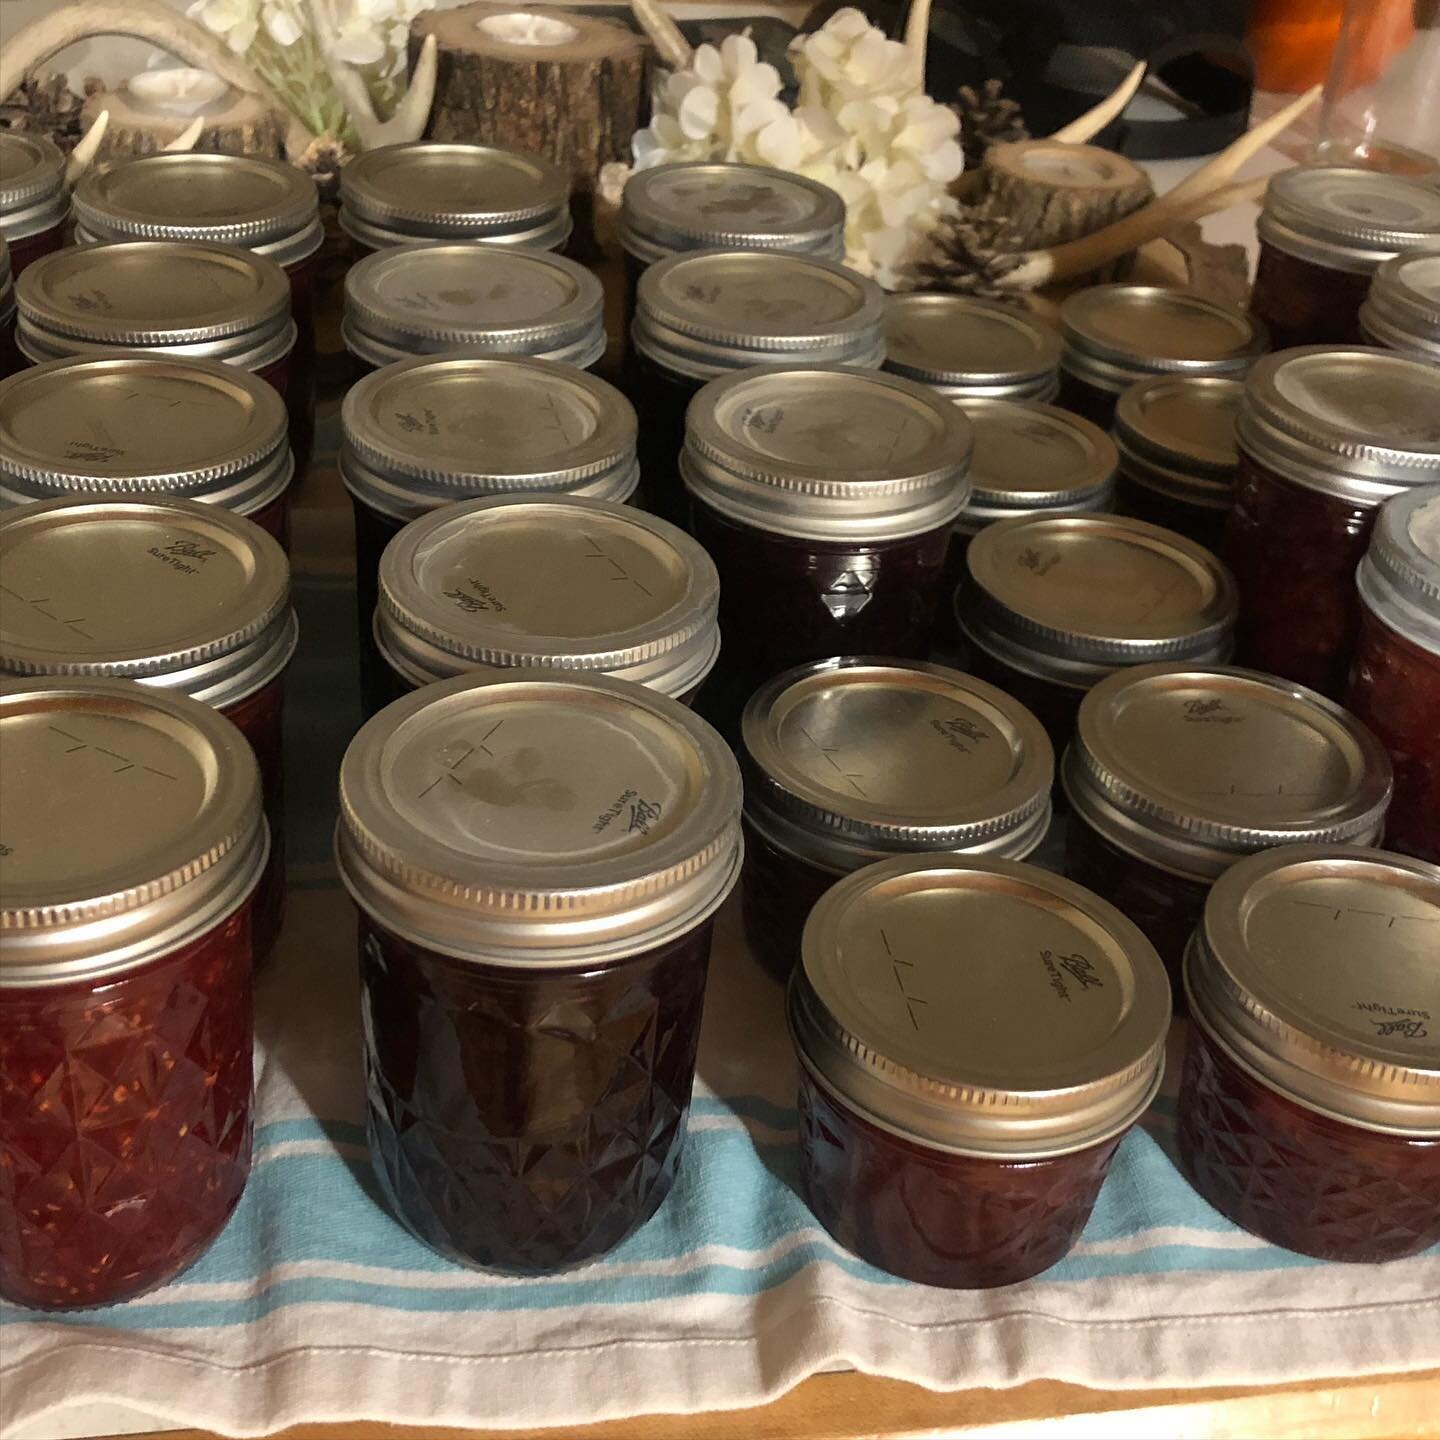 The past two days have been JAM-packed with jam making 🍓🫐🍋 Swing by the farm stand this weekend and scoop up a jar or two! Flavors: Strawberry Lemonade, Blueberry Cobbler, Raspberry Peach 🍑 #eggsneatsfarmstand #homemadejam #supportlocal #bristolw